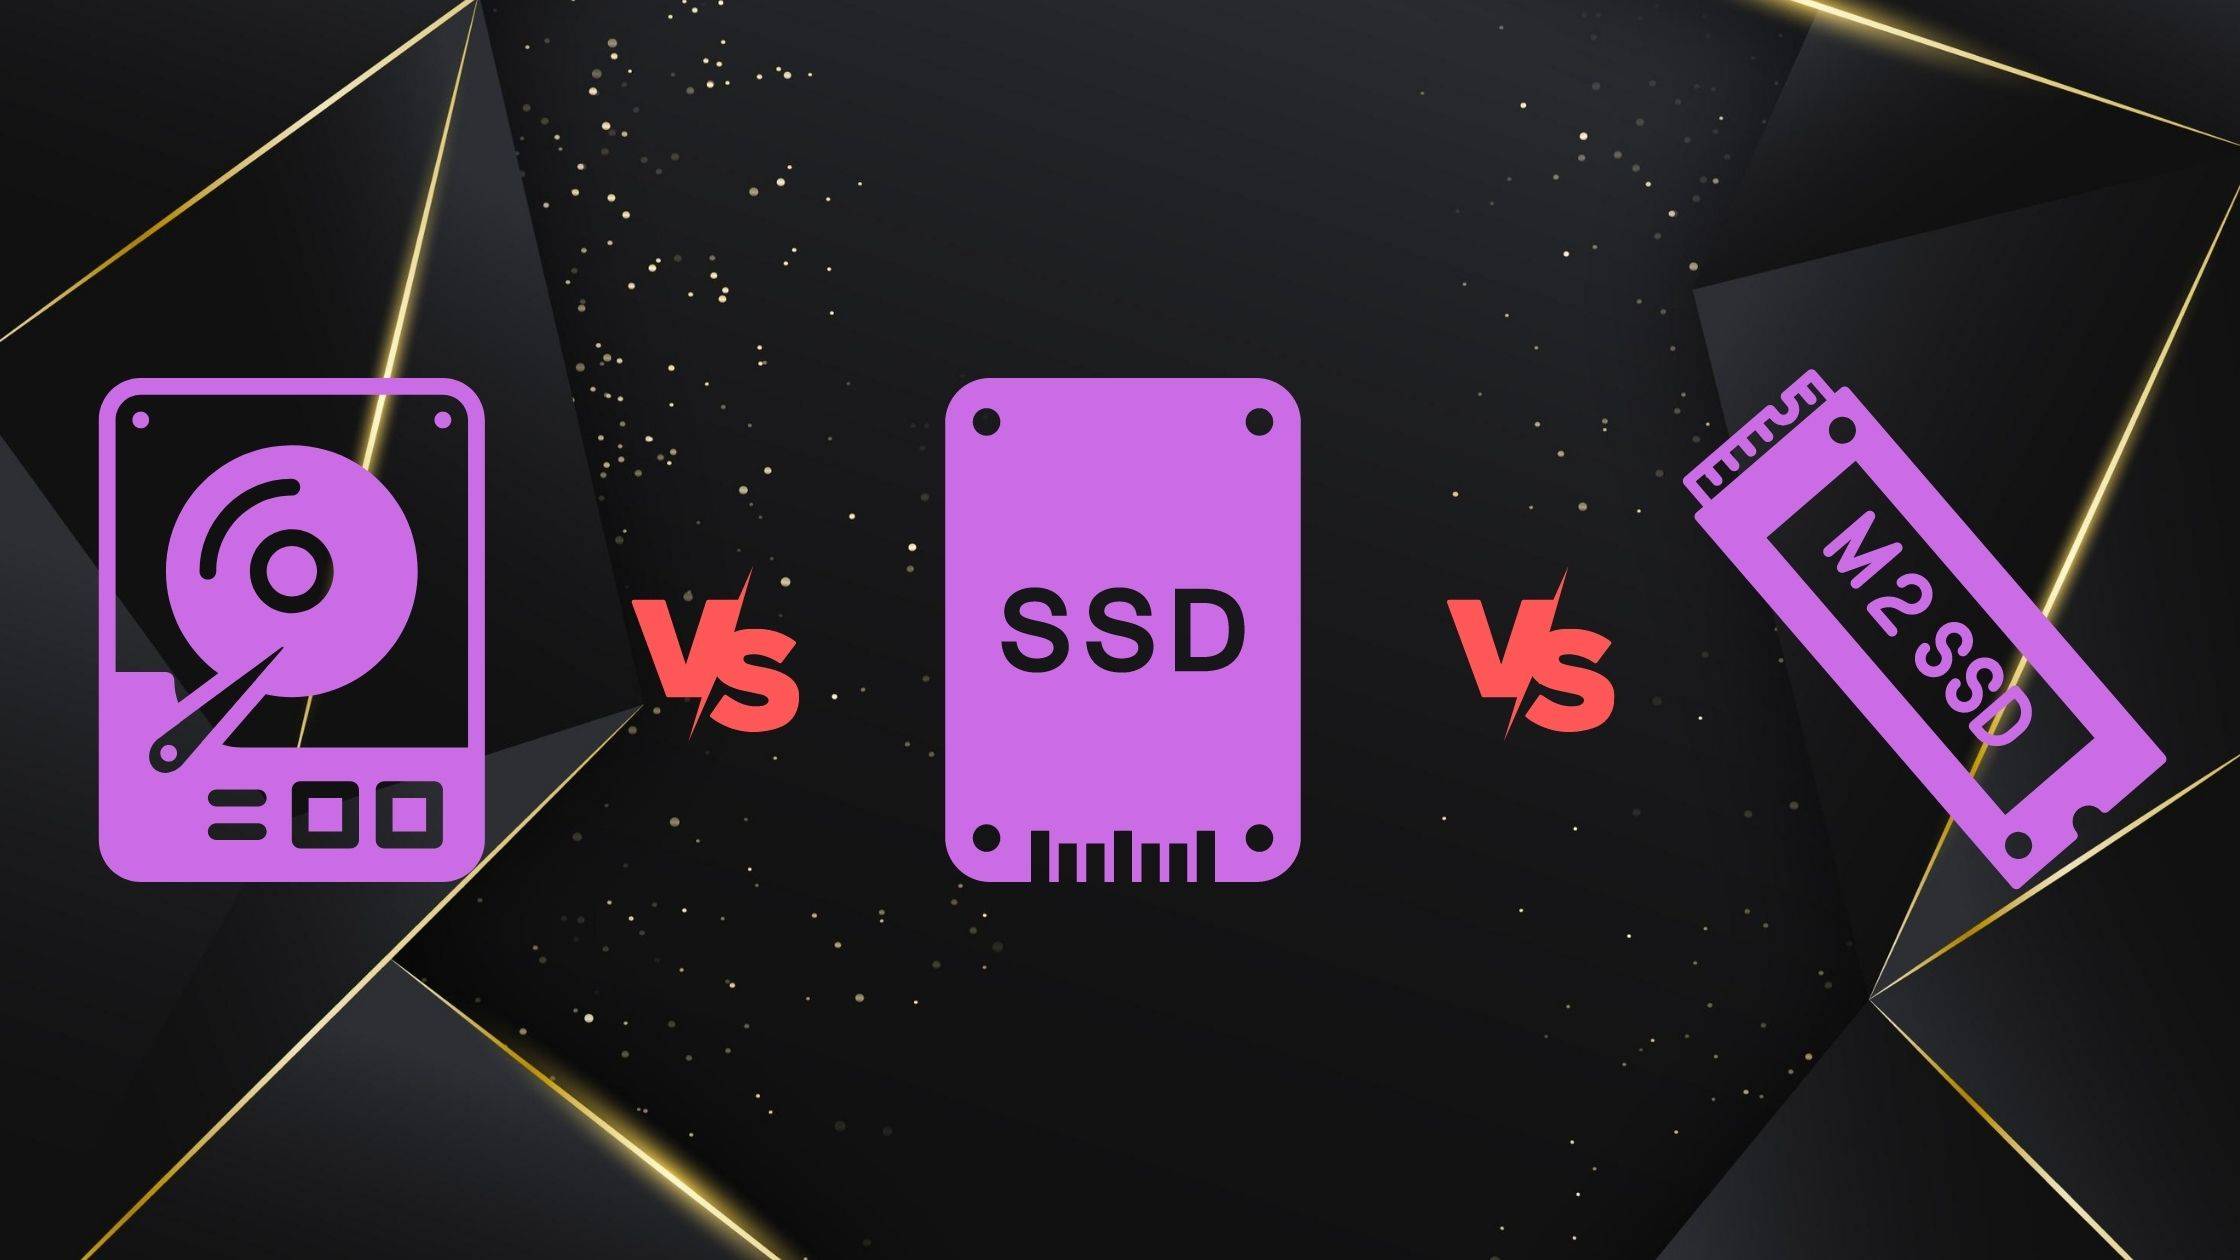 NVMe vs SATA: What's the difference and which is faster?